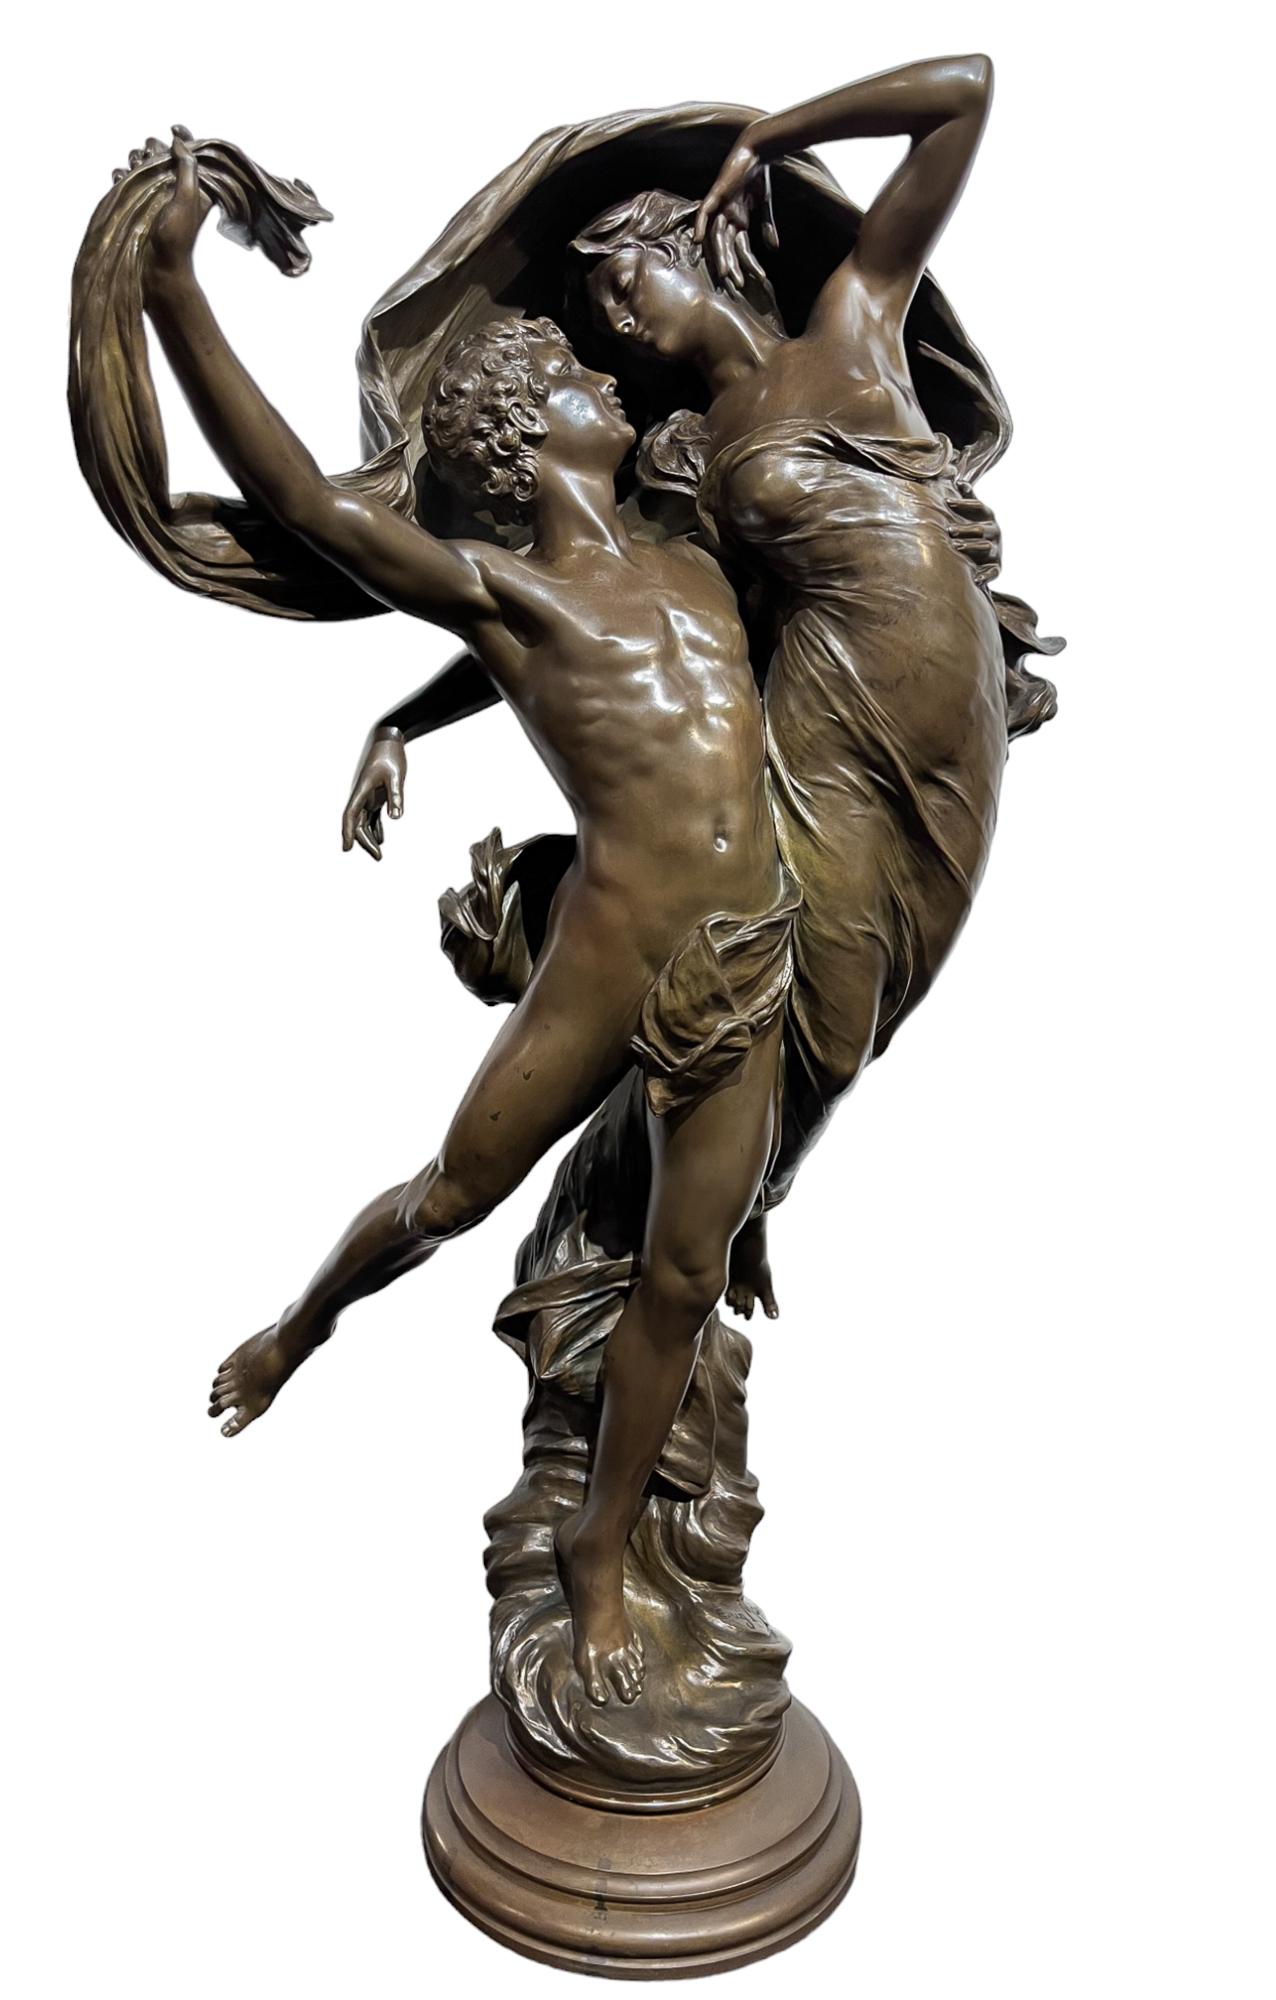 Eugene Marioton Figurative Sculpture - The Dance of Zephyr and Psyche by Eugéne Marioton (French, 1854-1933)